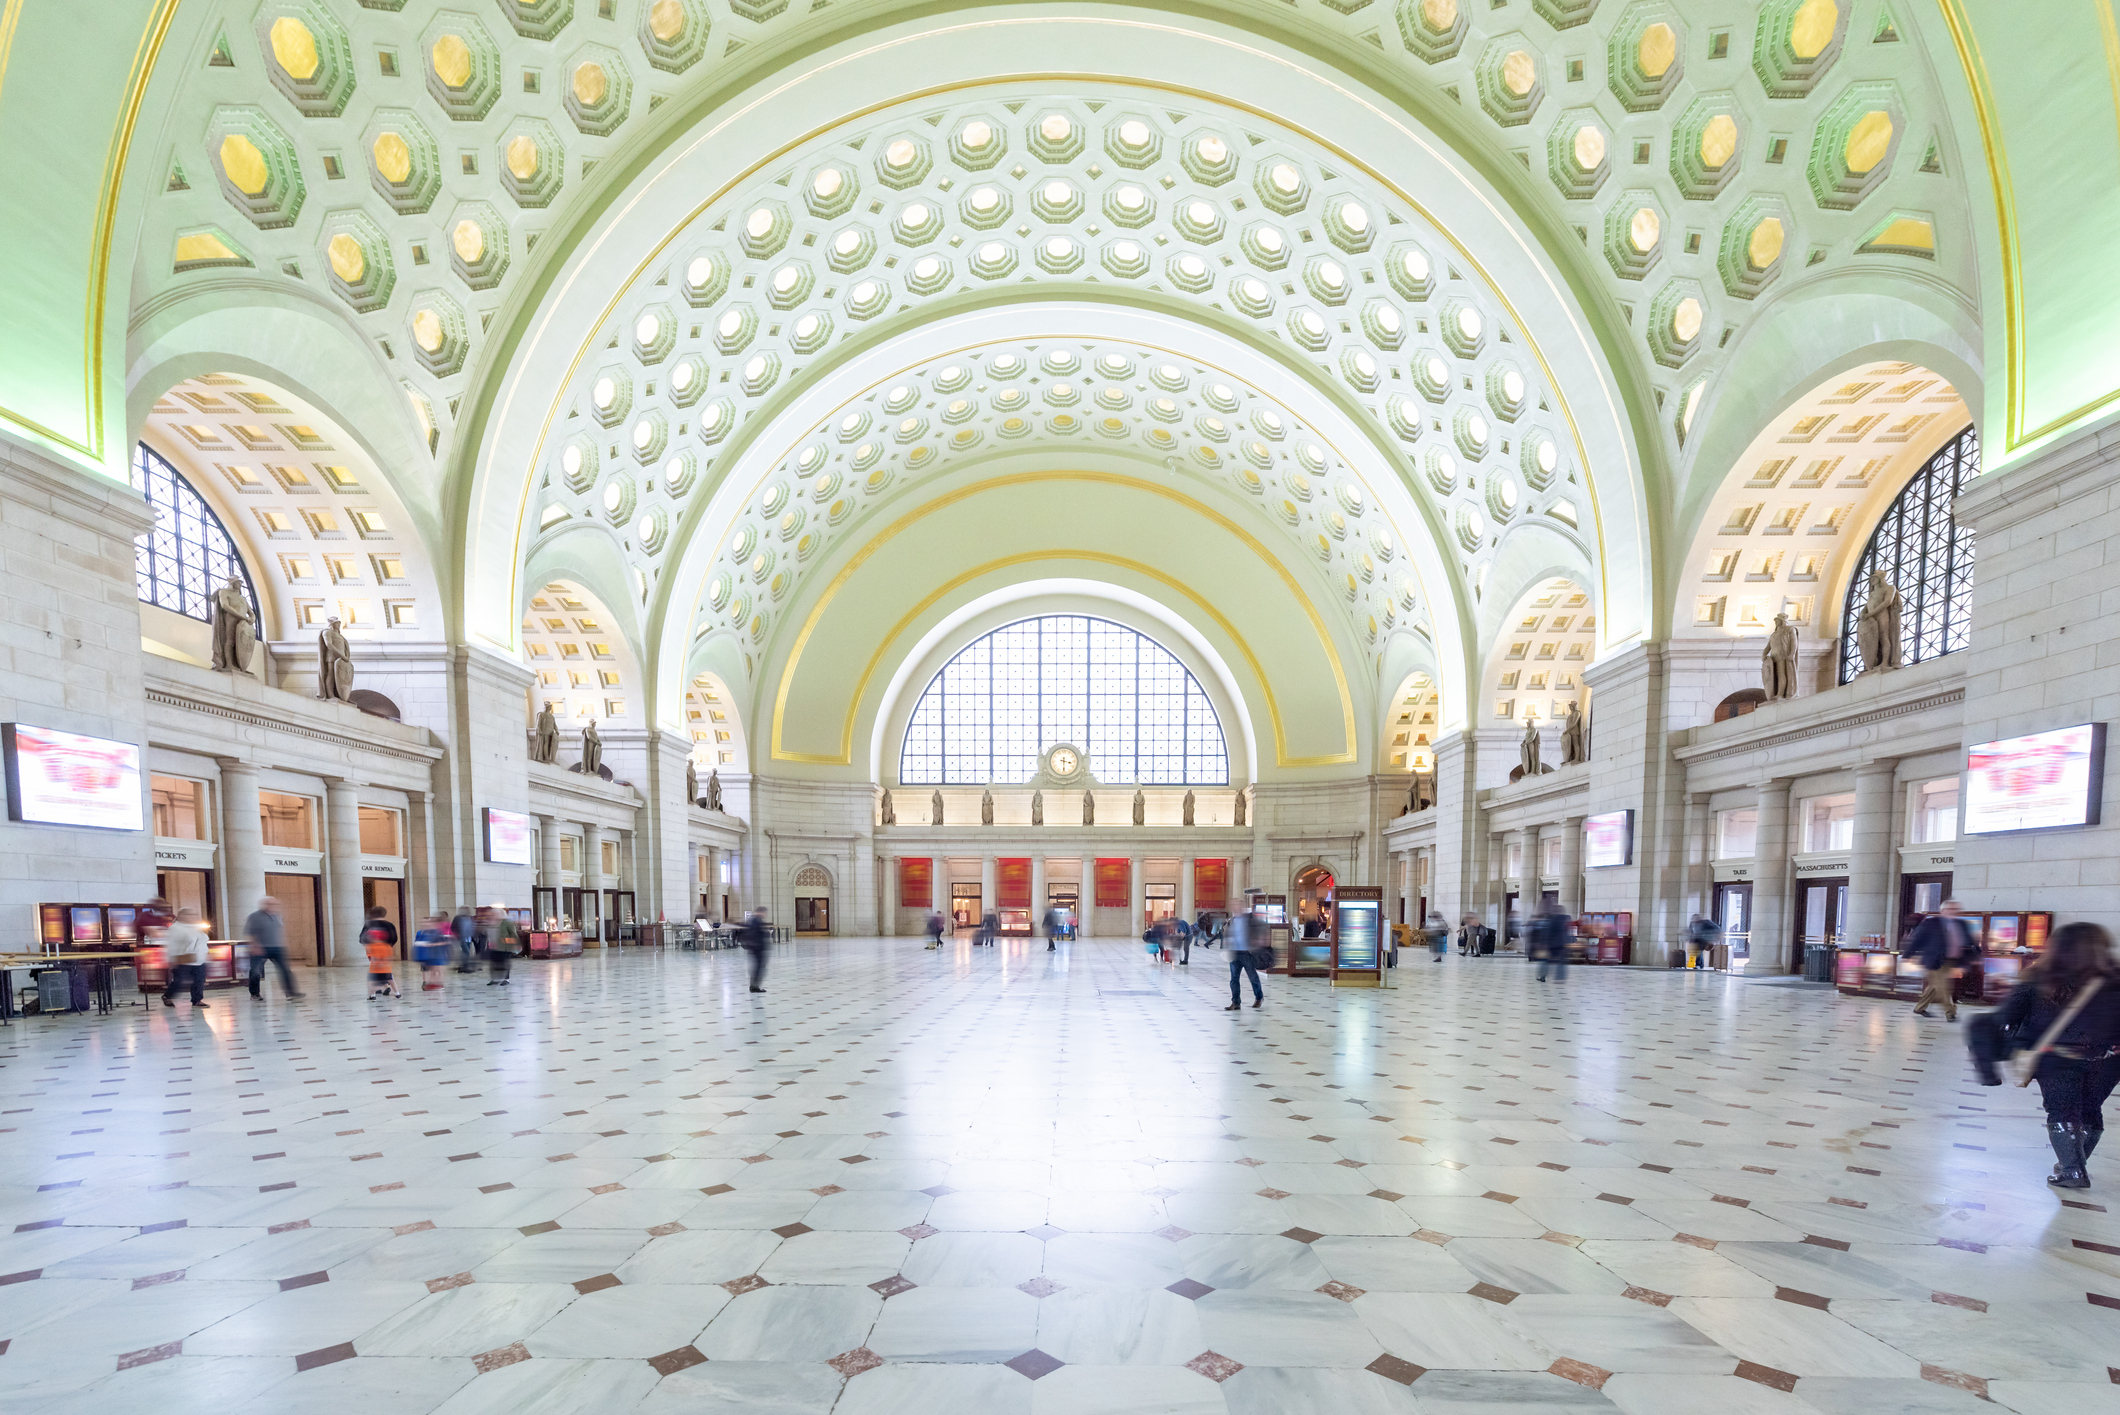 Union Station in capital city, arches architecture in main hall - © jimfeng / iStock / Getty Images Plus